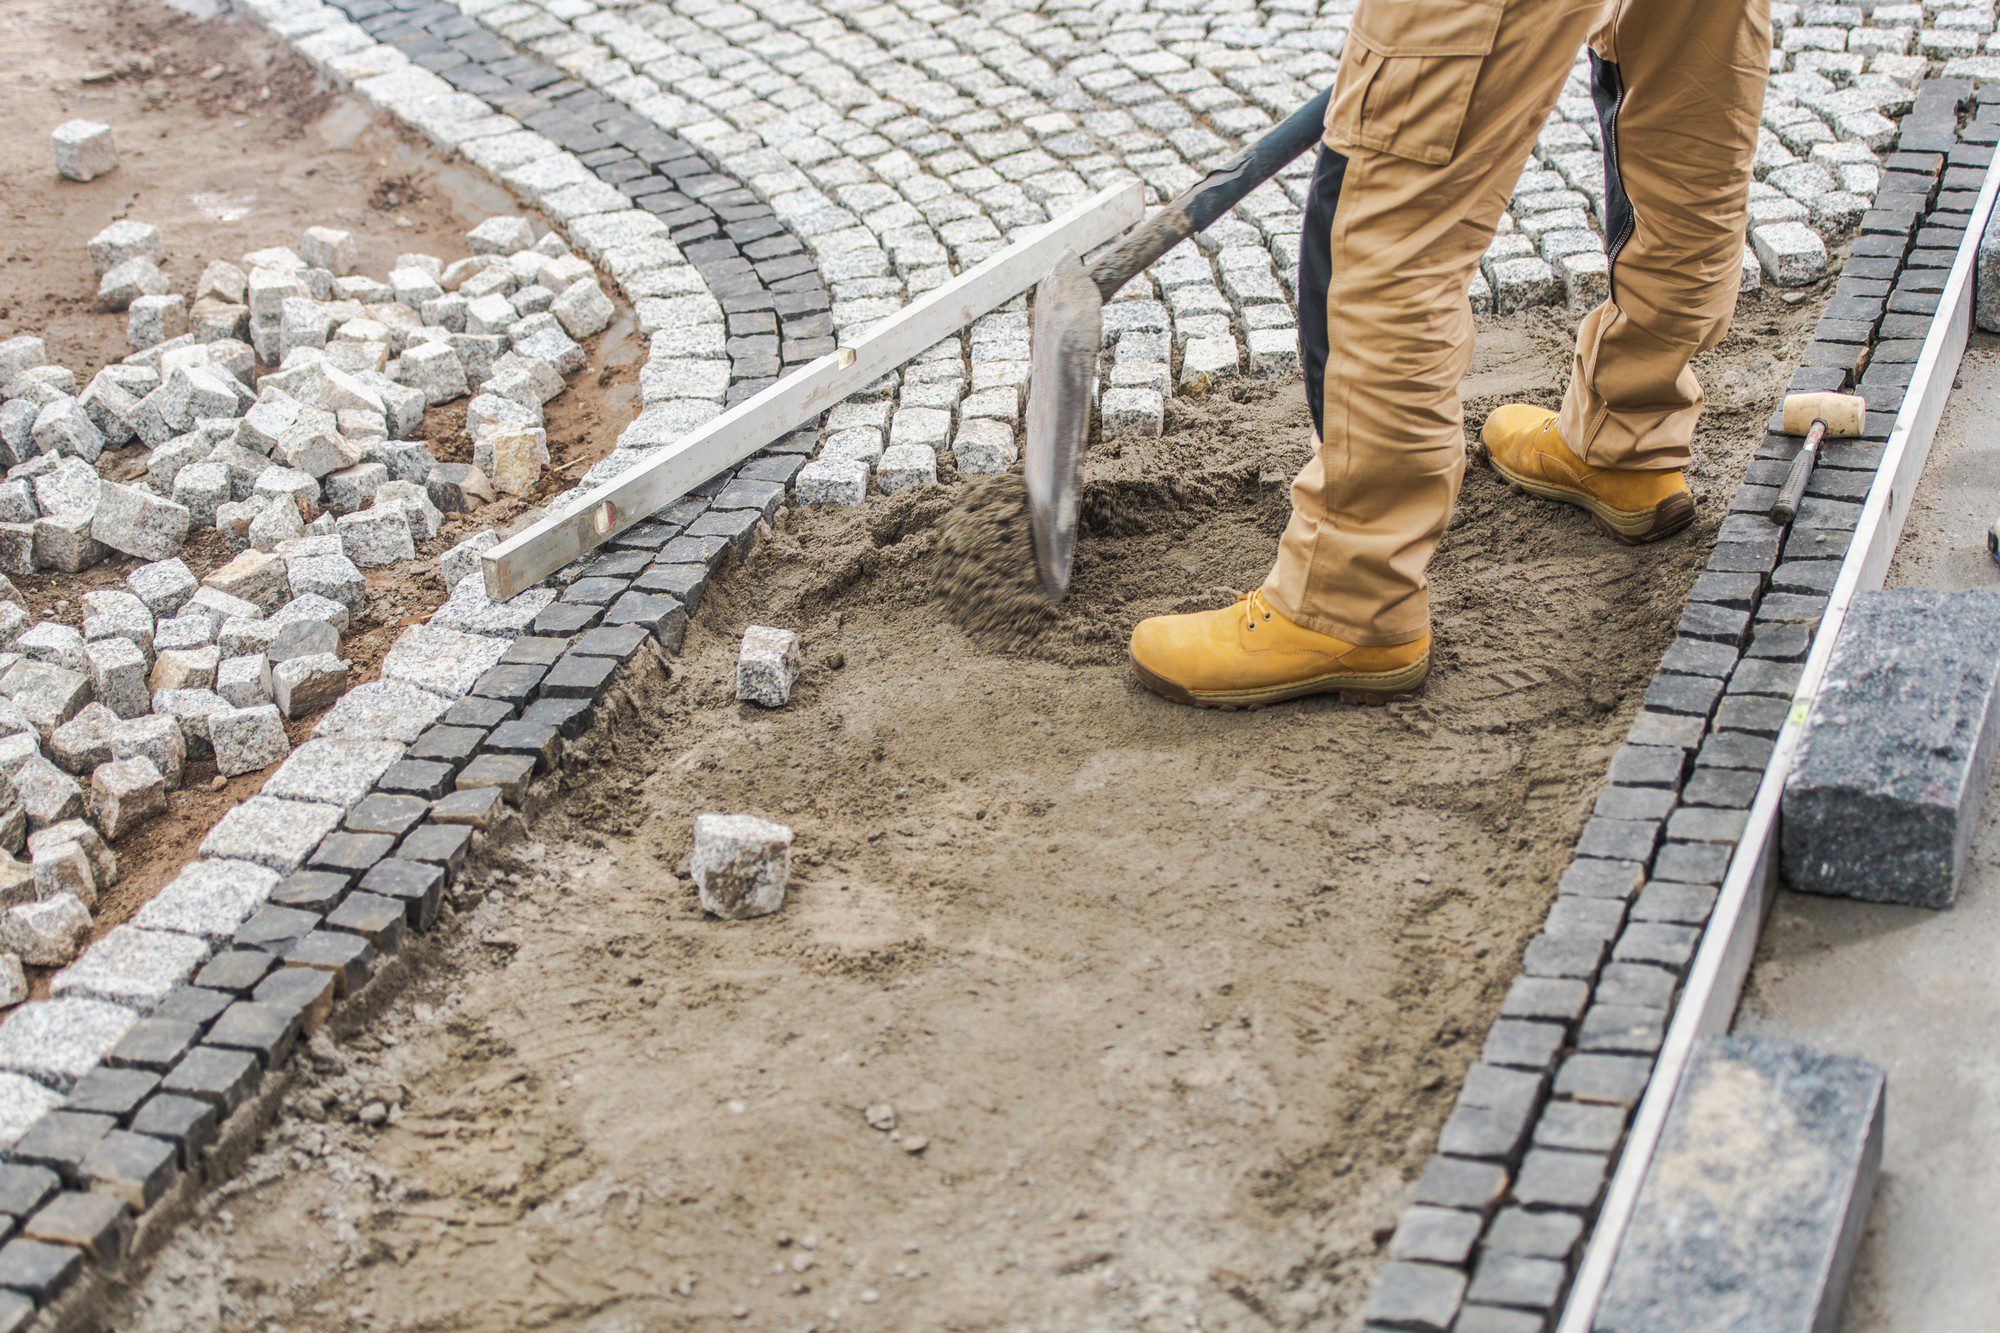 The image shows a person at work during the construction or repair of a cobblestone pavement. The person is wearing work boots and khaki pants, and they are using a shovel to spread what appears to be a layer of sand or fine gravel, which serves as the bedding for the cobblestones. You can see the unfinished section of the pavement where the base layer is exposed, along with a metal straightedge level resting on the surface to ensure the stones are laid at the correct height and alignment. Completed sections of the cobblestone path feature stones that have been neatly placed in an interlocking pattern. Some loose cobblestones are scattered around the work area, and the edge of the path is lined with a row of darker, larger stones or curb blocks, providing a clear border.